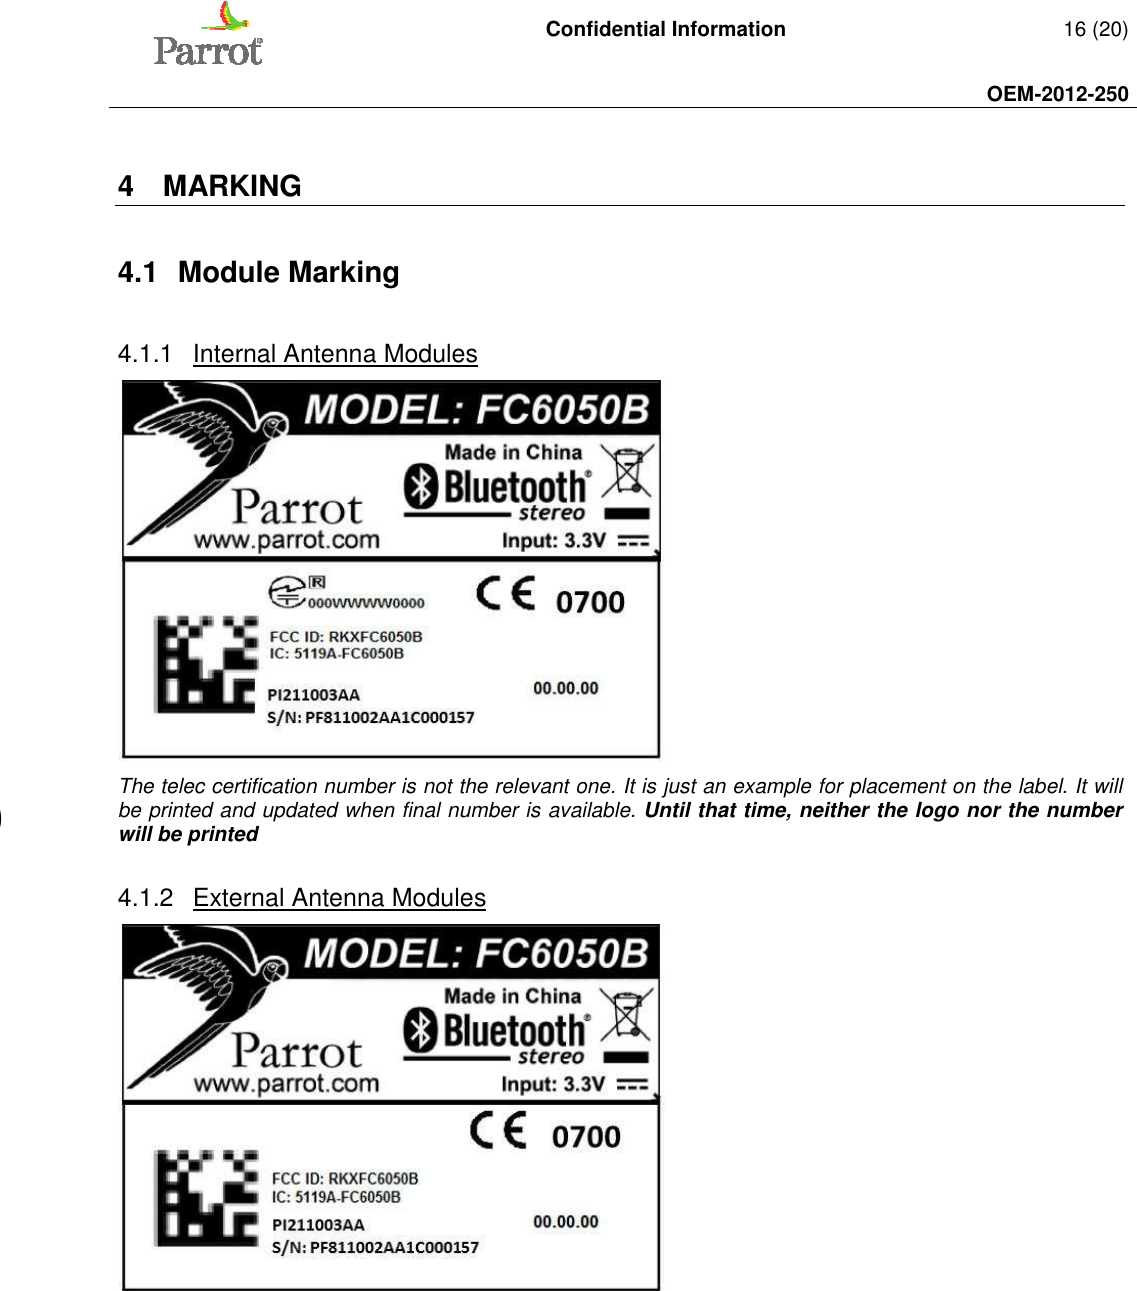   Confidential Information   16 (20)     OEM-2012-250    4  MARKING  4.1  Module Marking 4.1.1  Internal Antenna Modules  The telec certification number is not the relevant one. It is just an example for placement on the label. It will be printed and updated when final number is available. Until that time, neither the logo nor the number will be printed 4.1.2  External Antenna Modules  0700 